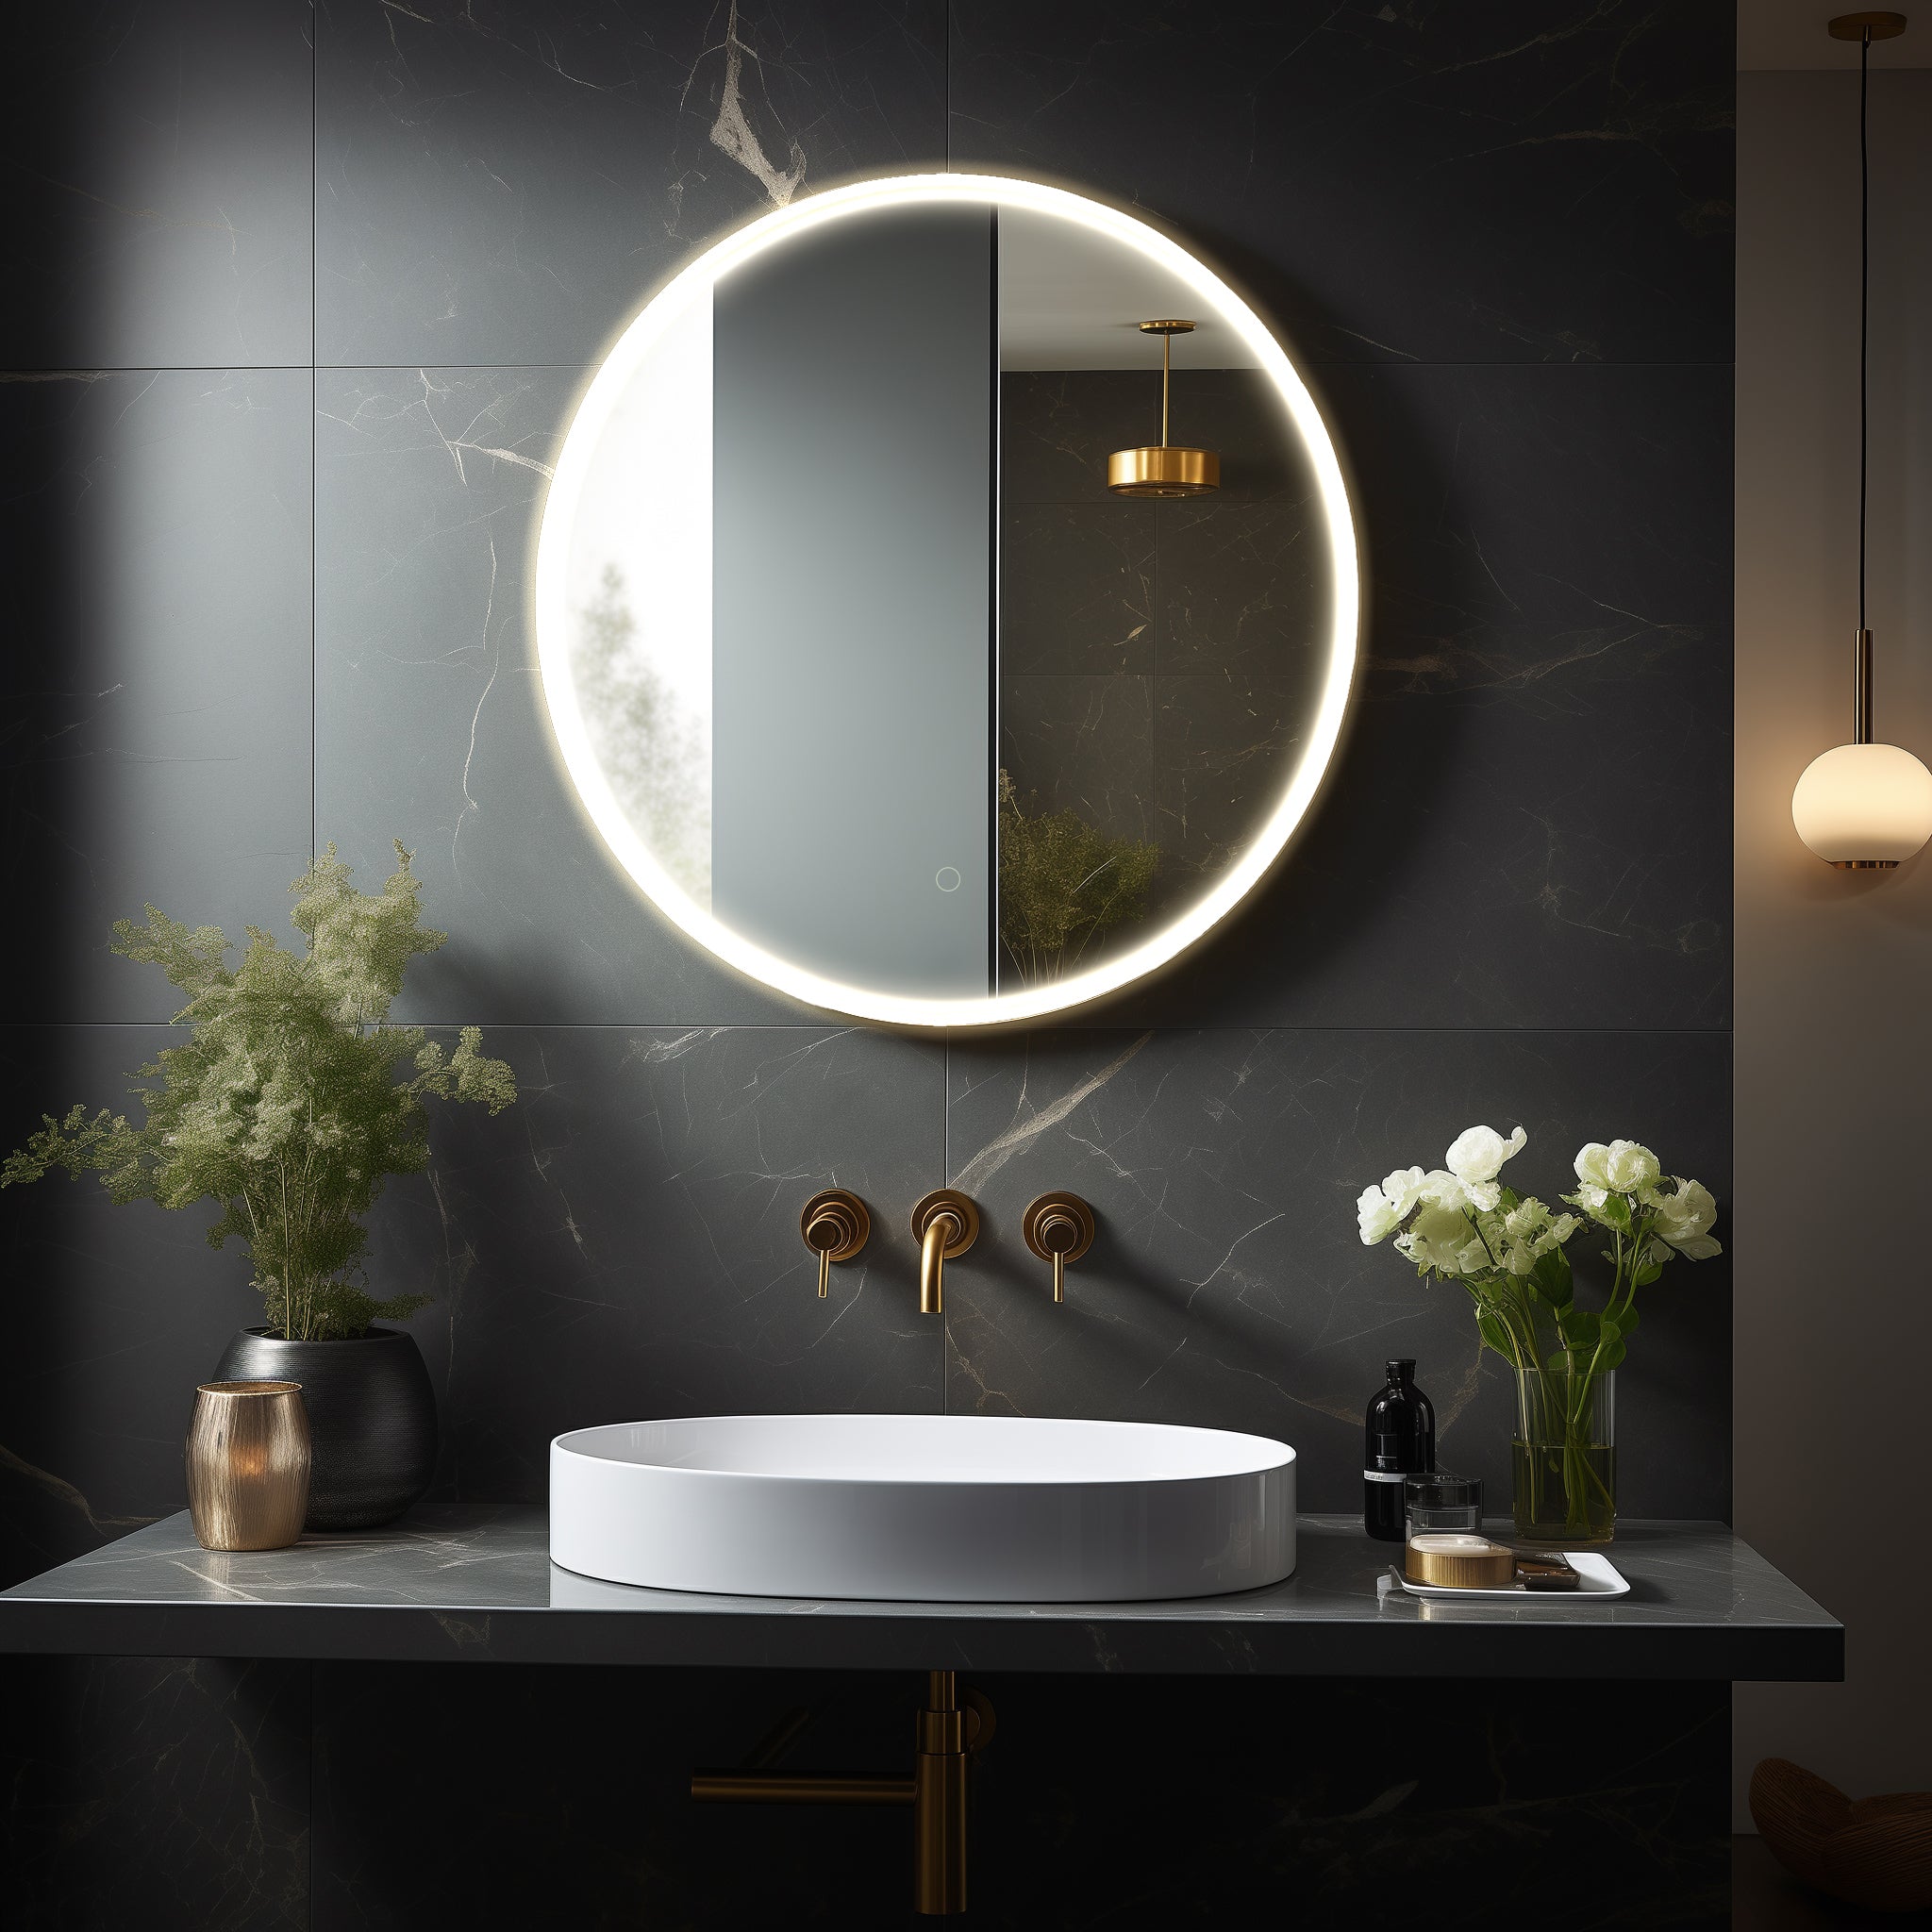 Onyx Round Frameless LED Mirror with Defogger and Integrated Touch Switch - Available in 2 Sizes - Dreamwerks